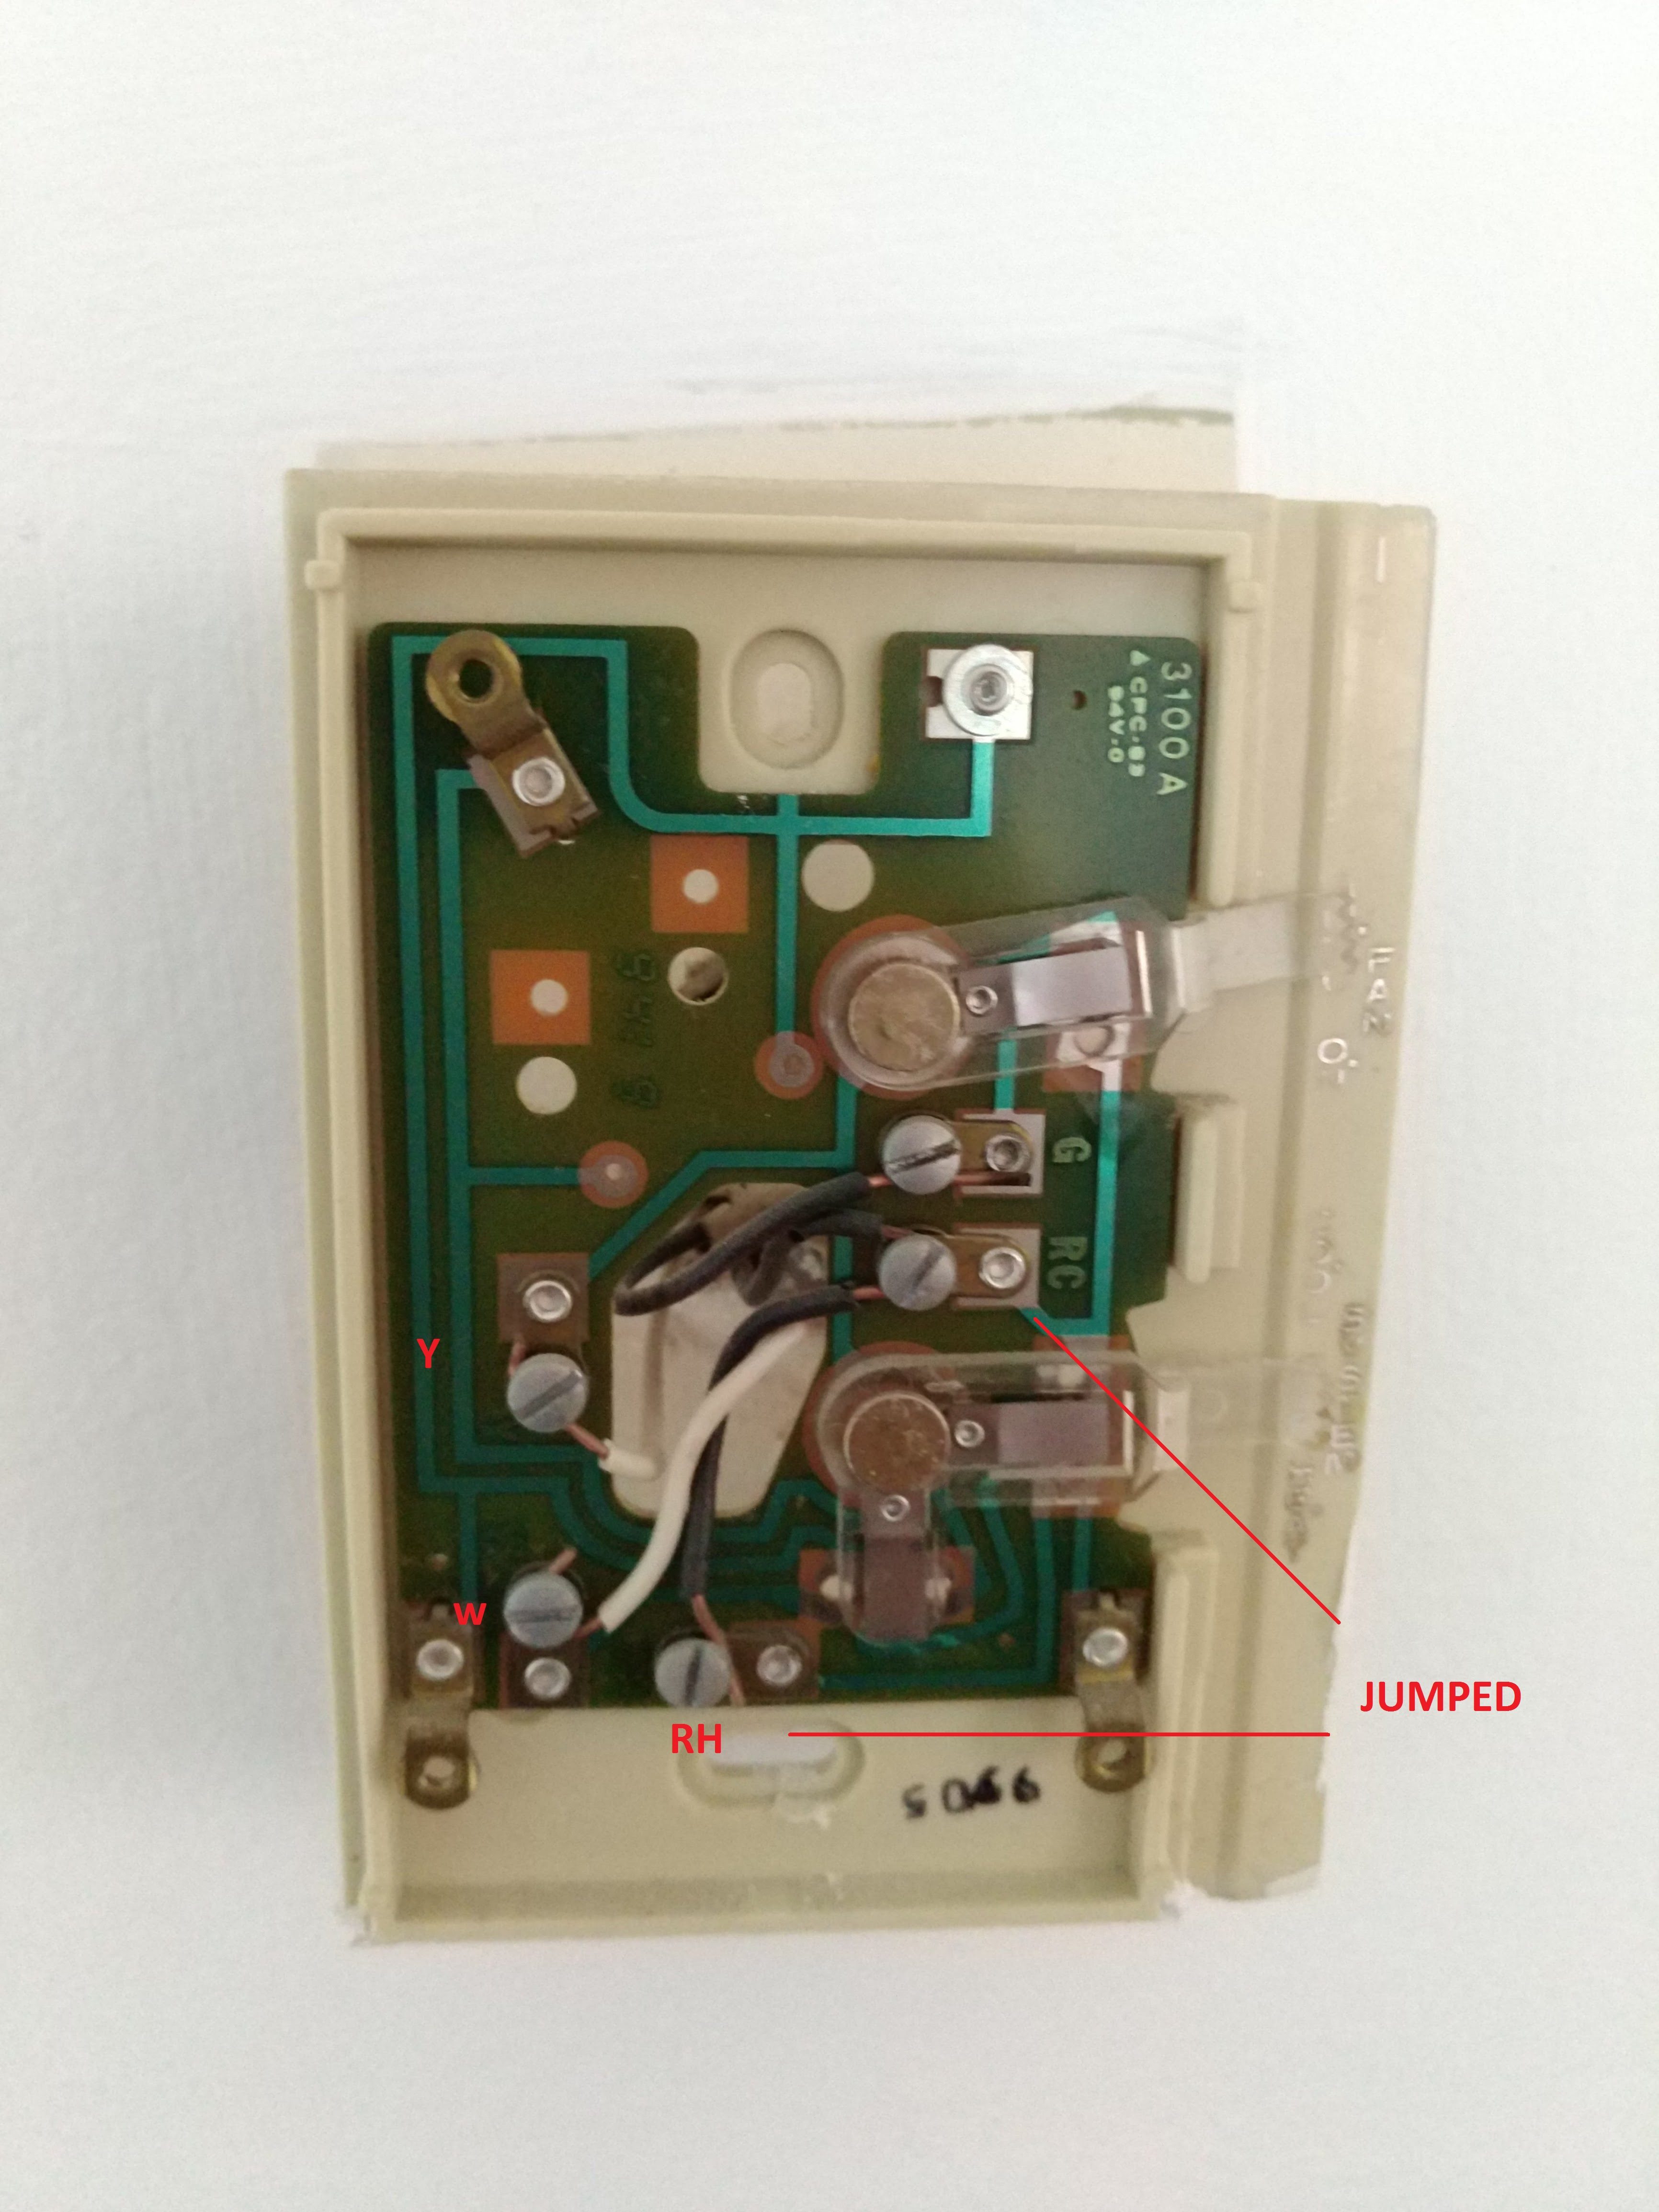 Need Help Wiring Semi New Thermostat To Old Furnace Redflagdeals Com Forums